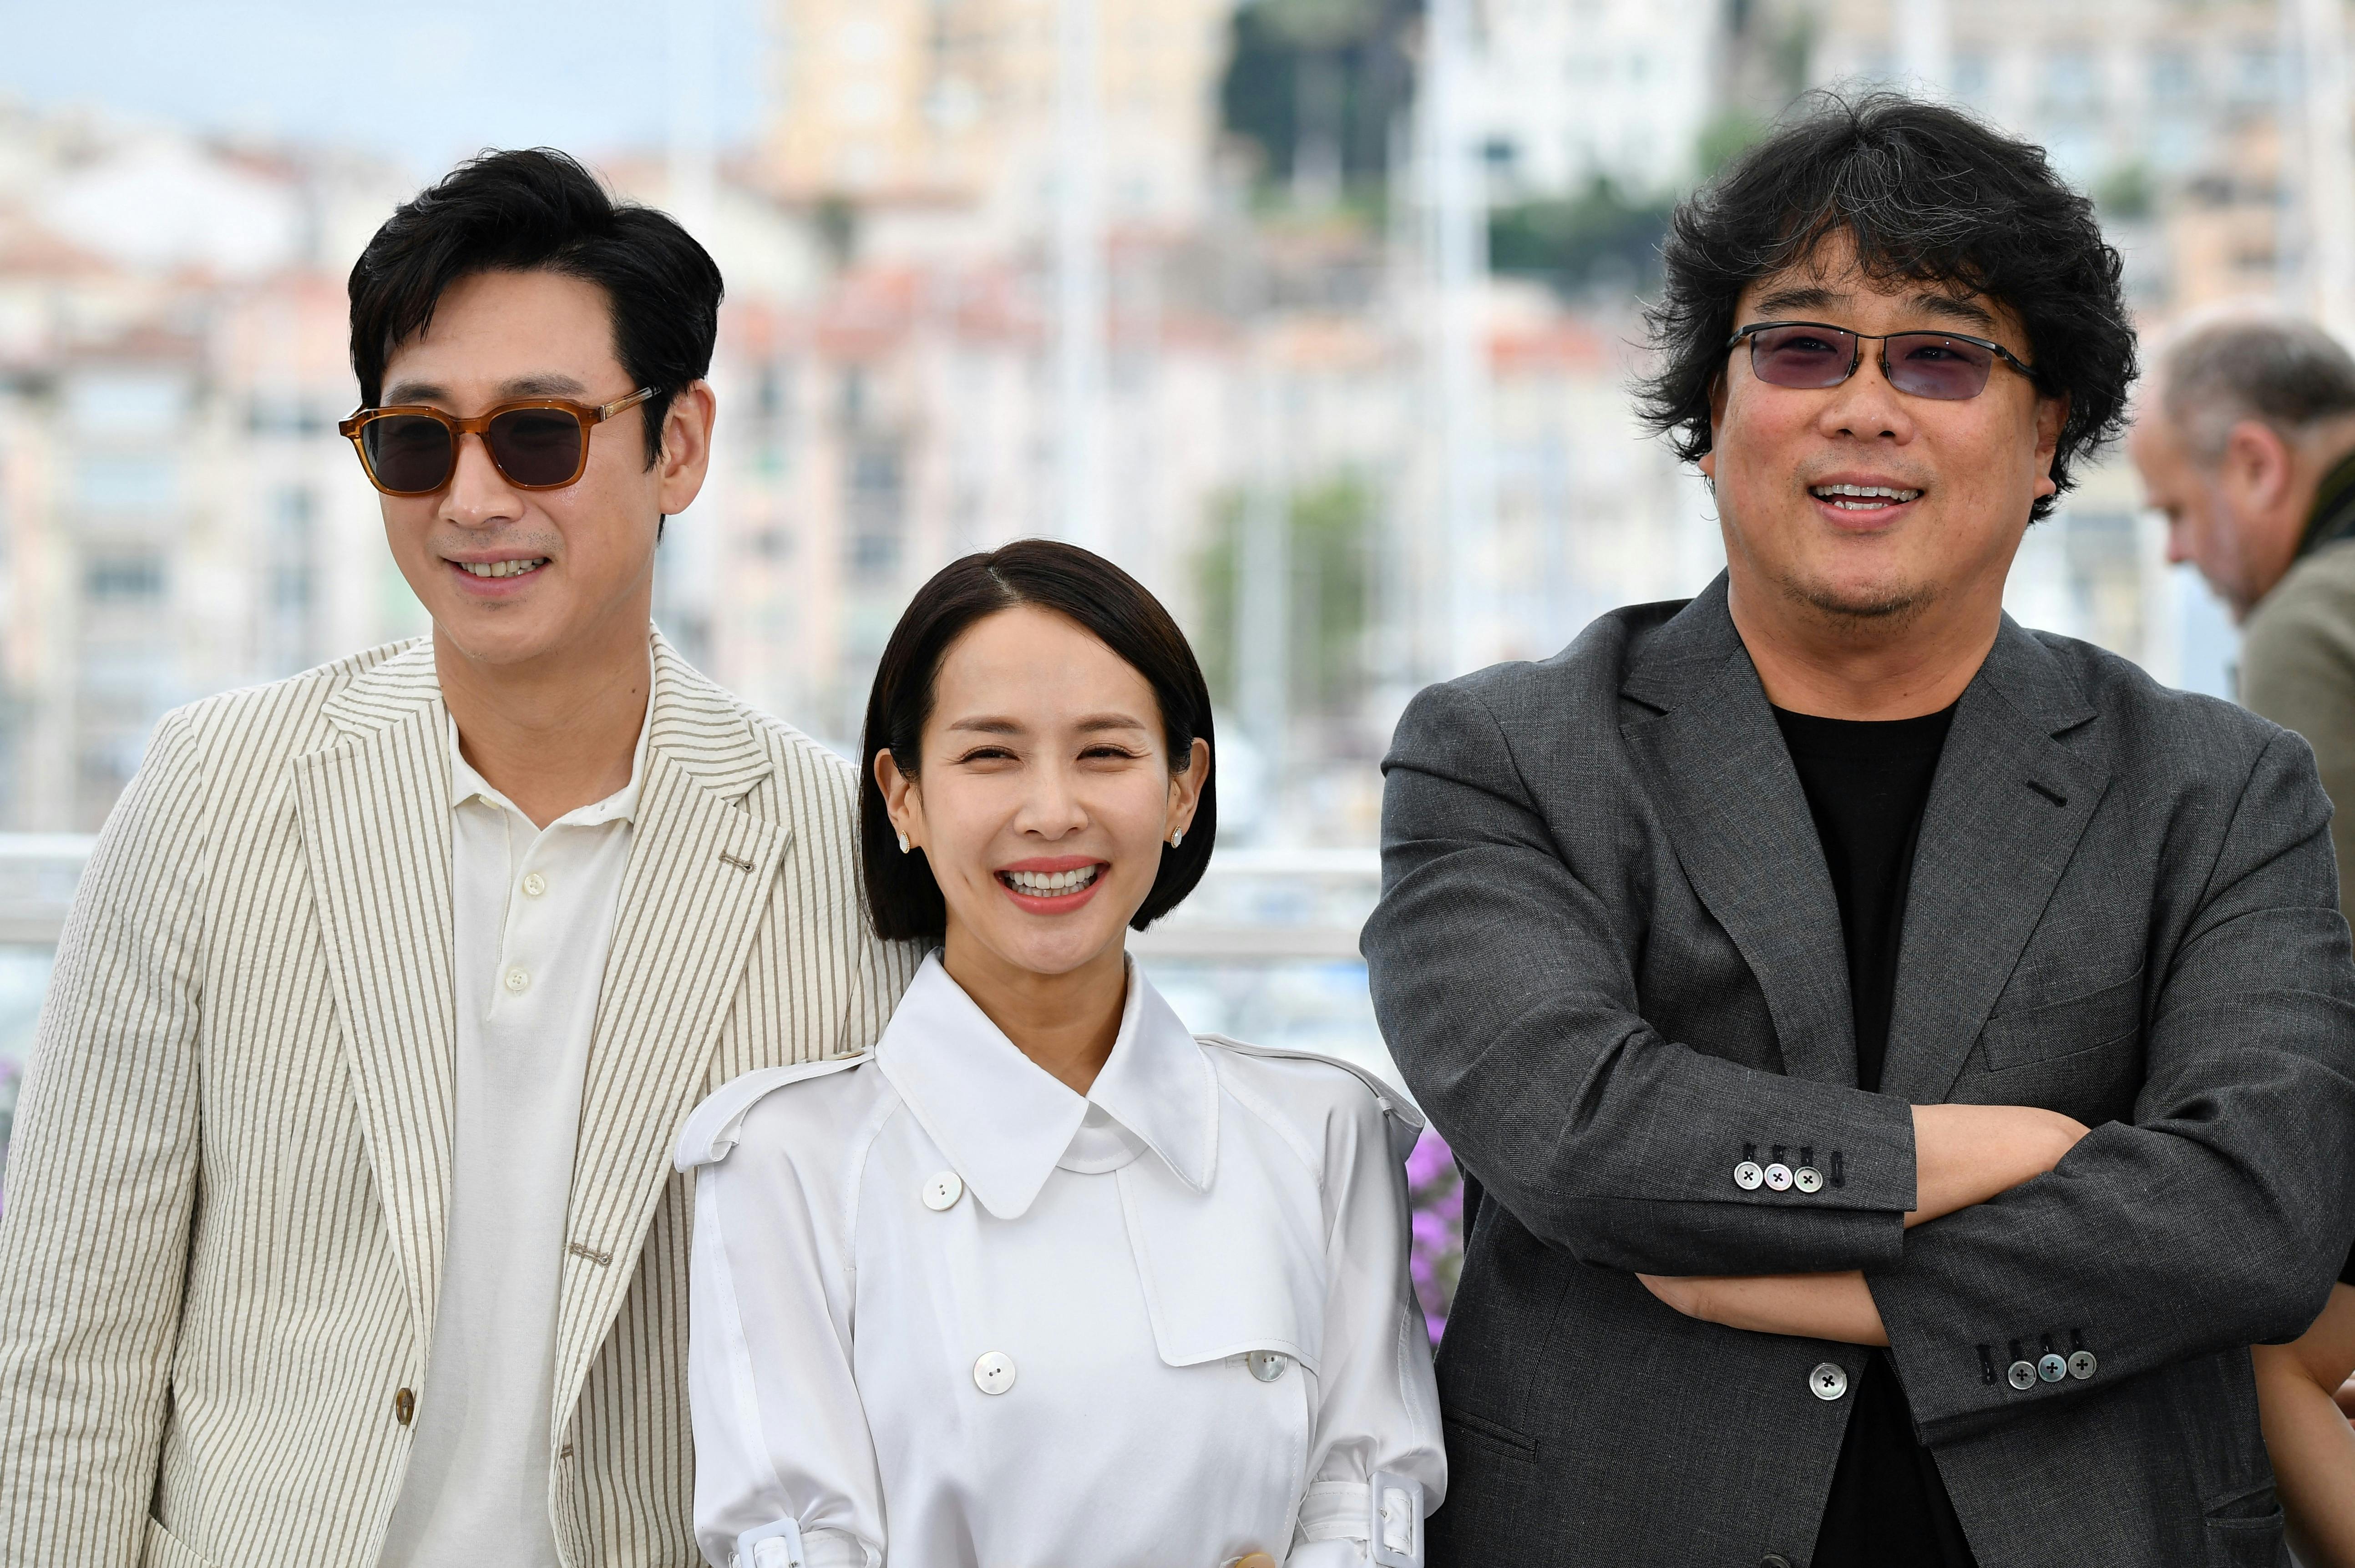 (FromL) South Korean actor Lee Sun-kyun, South Korean actress Cho Yeo-jeong and South Korean director Bong Joon-Ho pose during a photocall for the film "Parasite (Gisaengchung)" at the 72nd edition of the Cannes Film Festival in Cannes, southern France, on May 22, 2019.  Alberto PIZZOLI / AFP